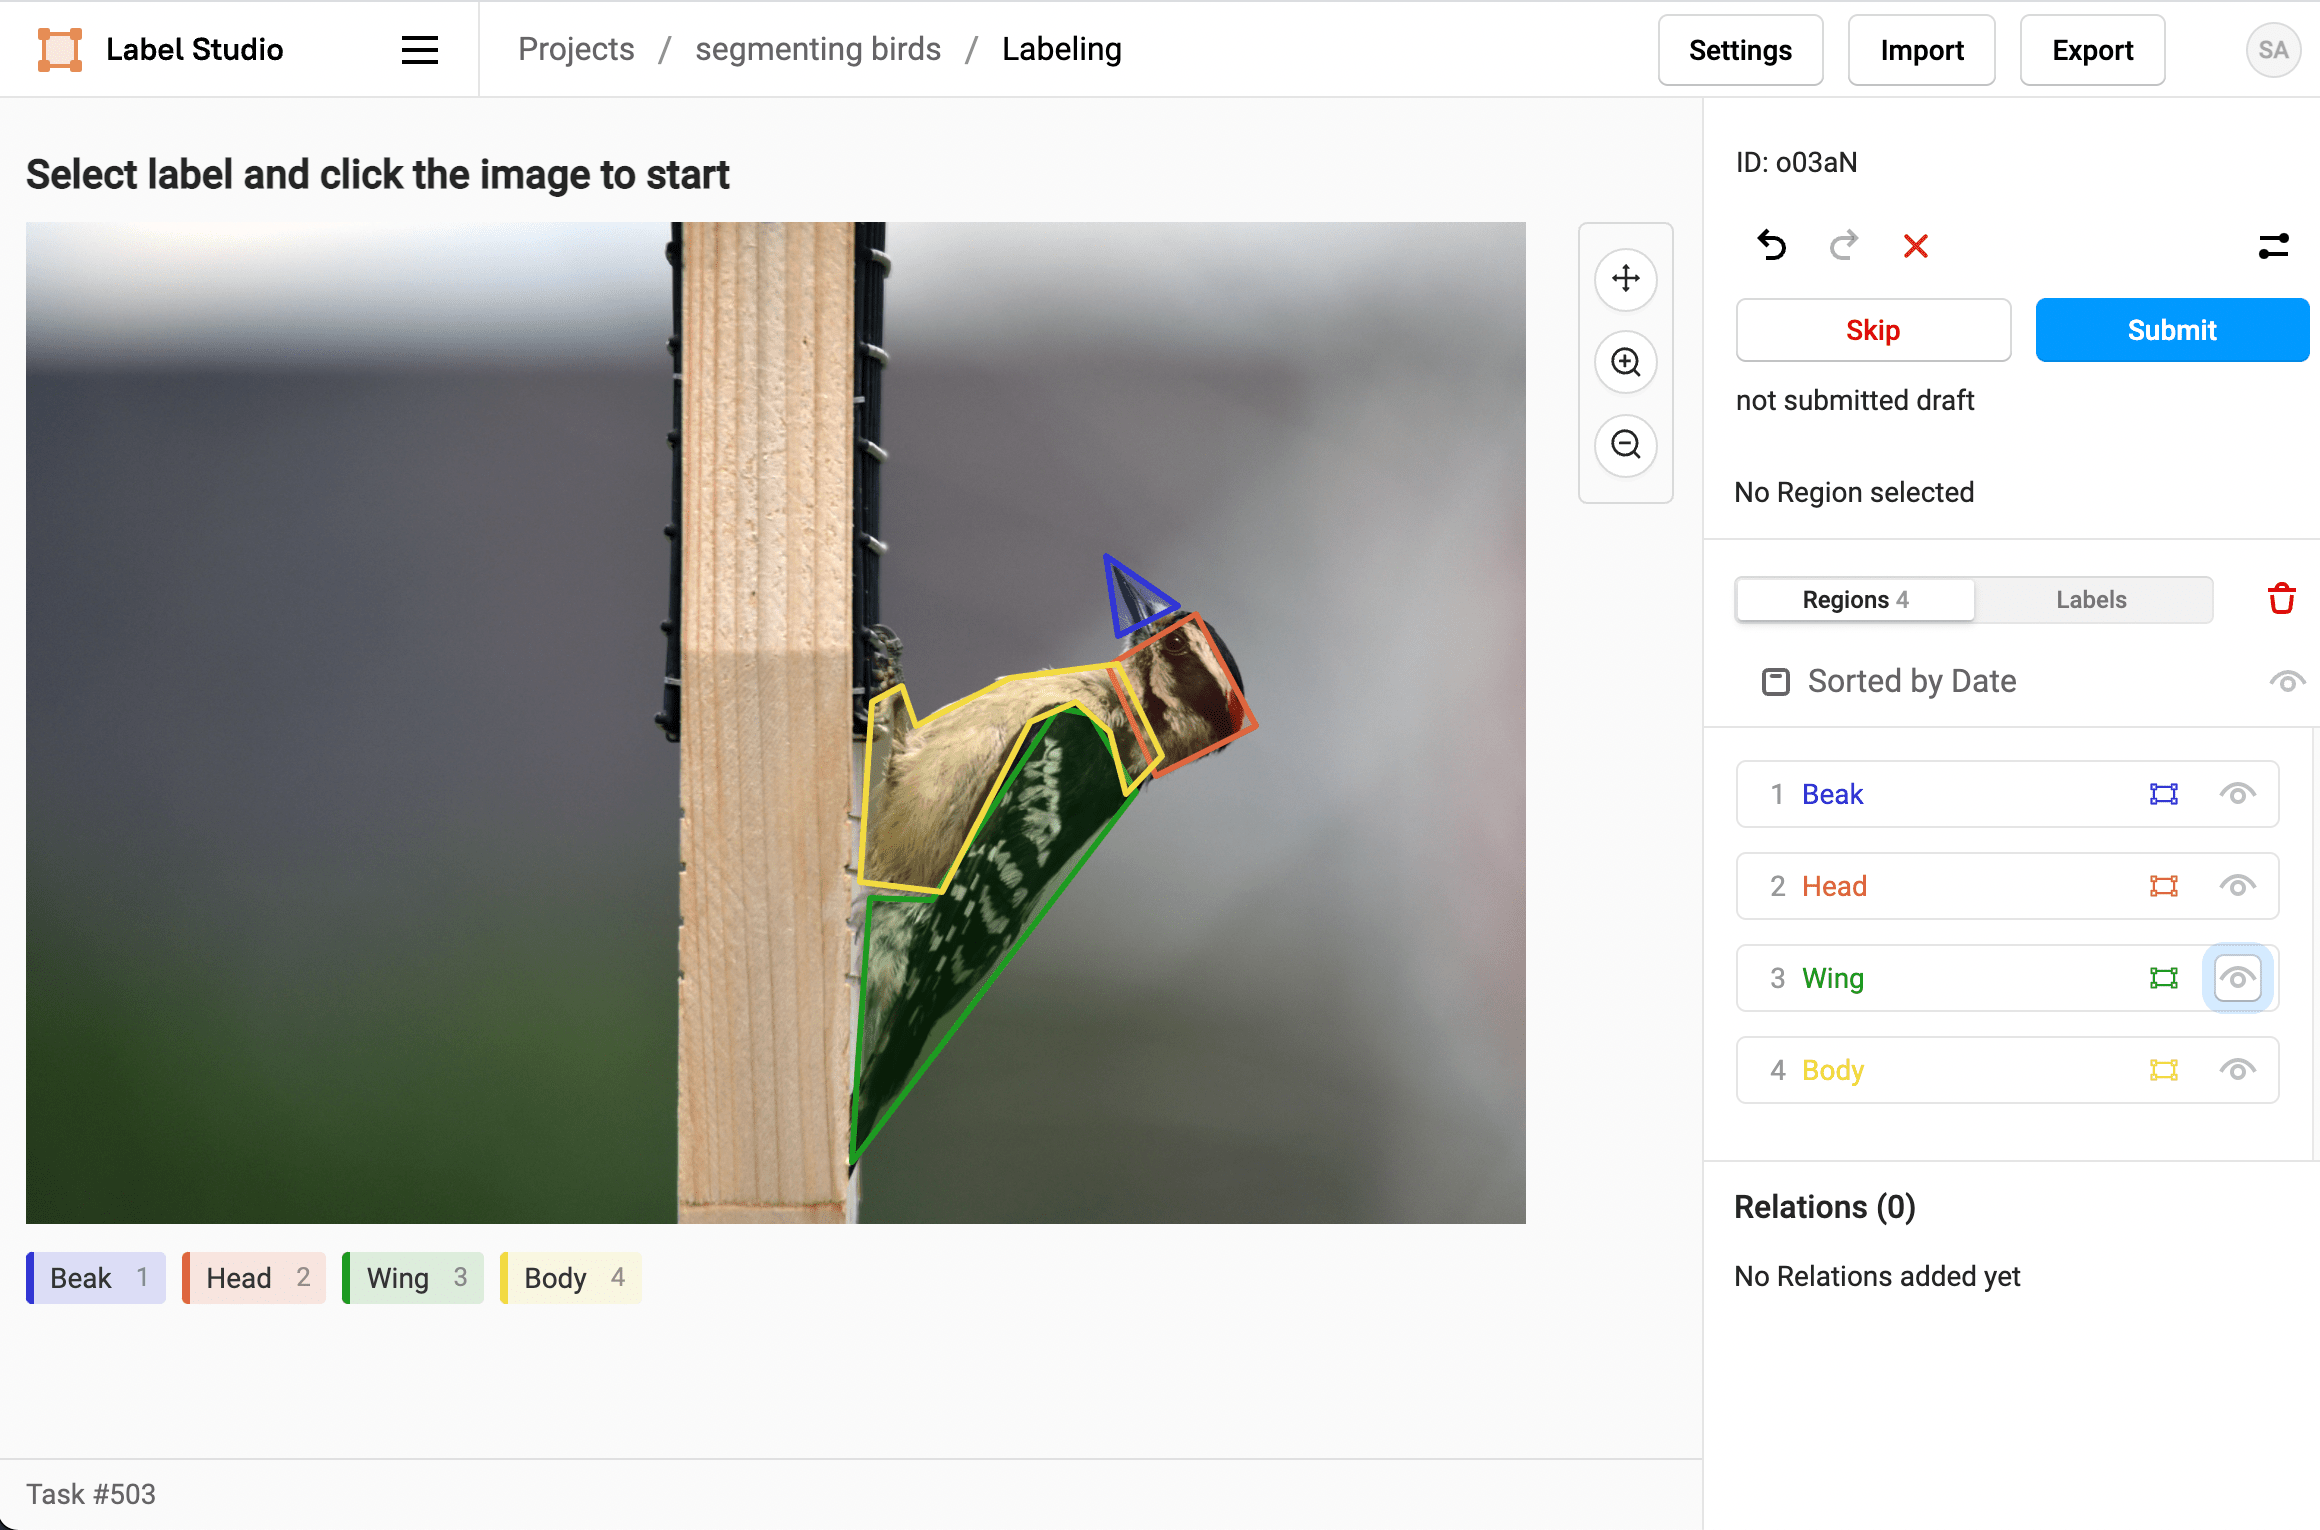 Screenshot of the Label Studio labeling UI with a woodpecker sitting on a bird feeder with the beak, head, wing, and body labeled with different colored polygons, and the labeled regions visible on the right hand sidebar.